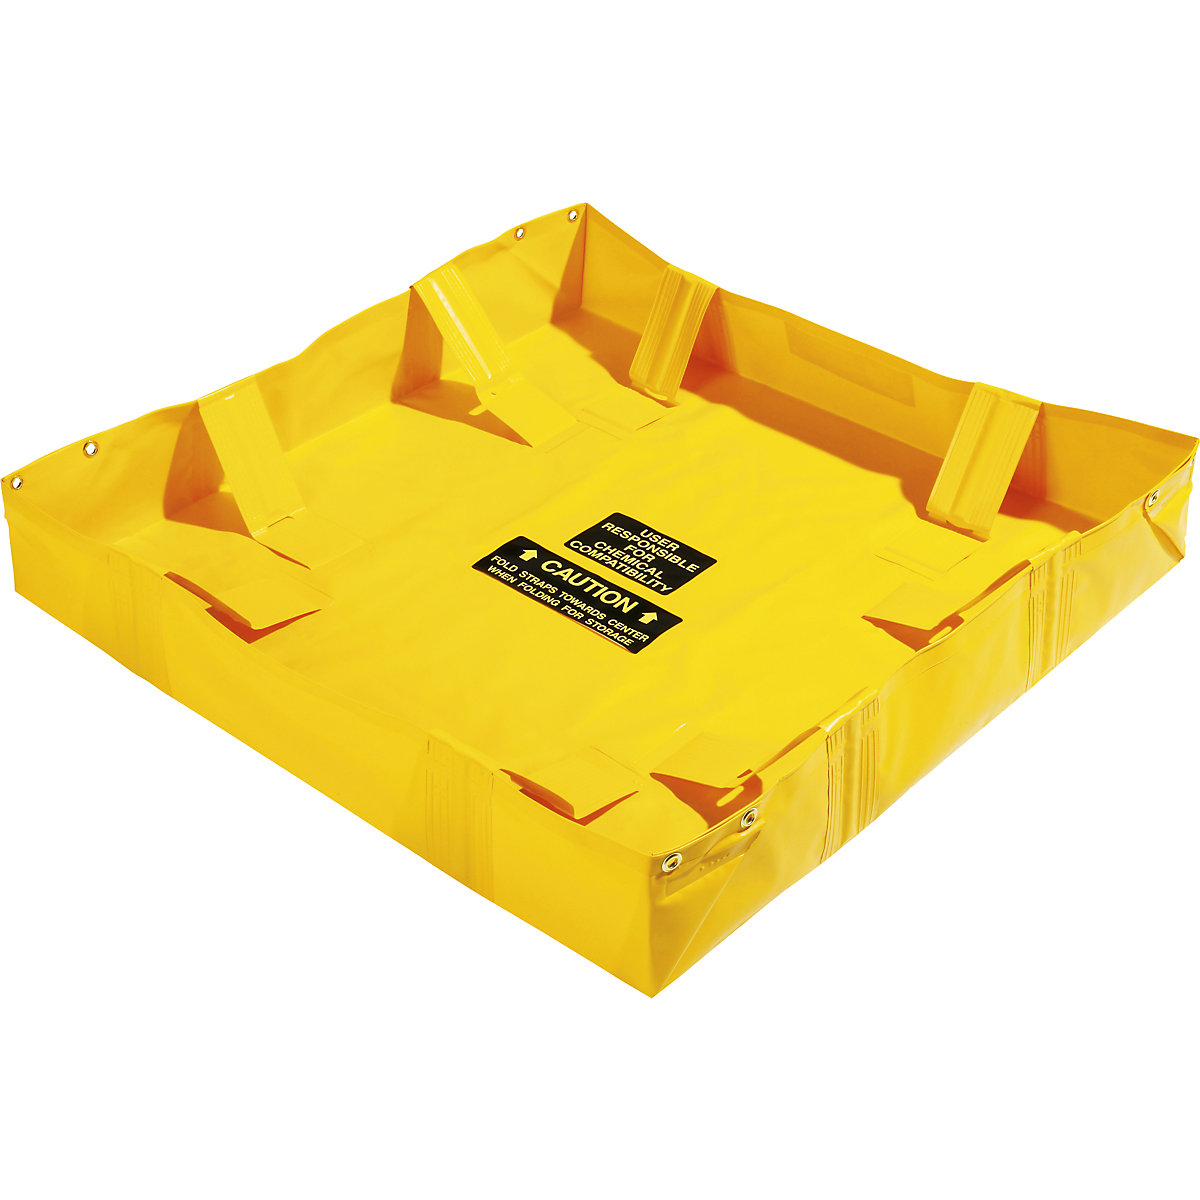 Collapse-A-Tainer® Lite emergency folding tray – PIG, material vinyl, collection capacity 299 l-1